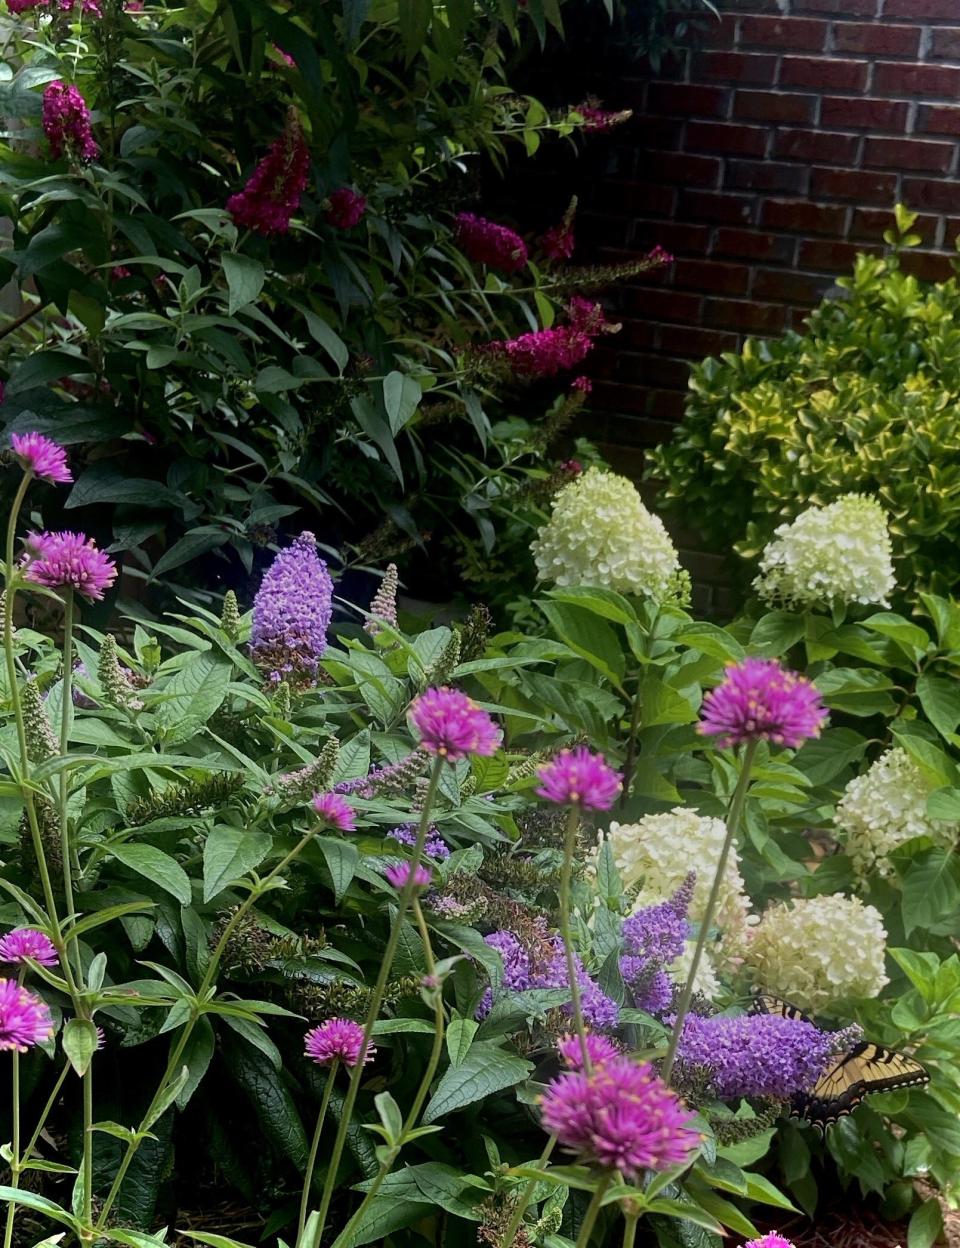 This special corner at The Garden’s Guy’s house features Miss Molly buddleia, Quick Fire Fab hydrangea, Pugster Amethyst buddleia and Truffula Pink gomphrena.